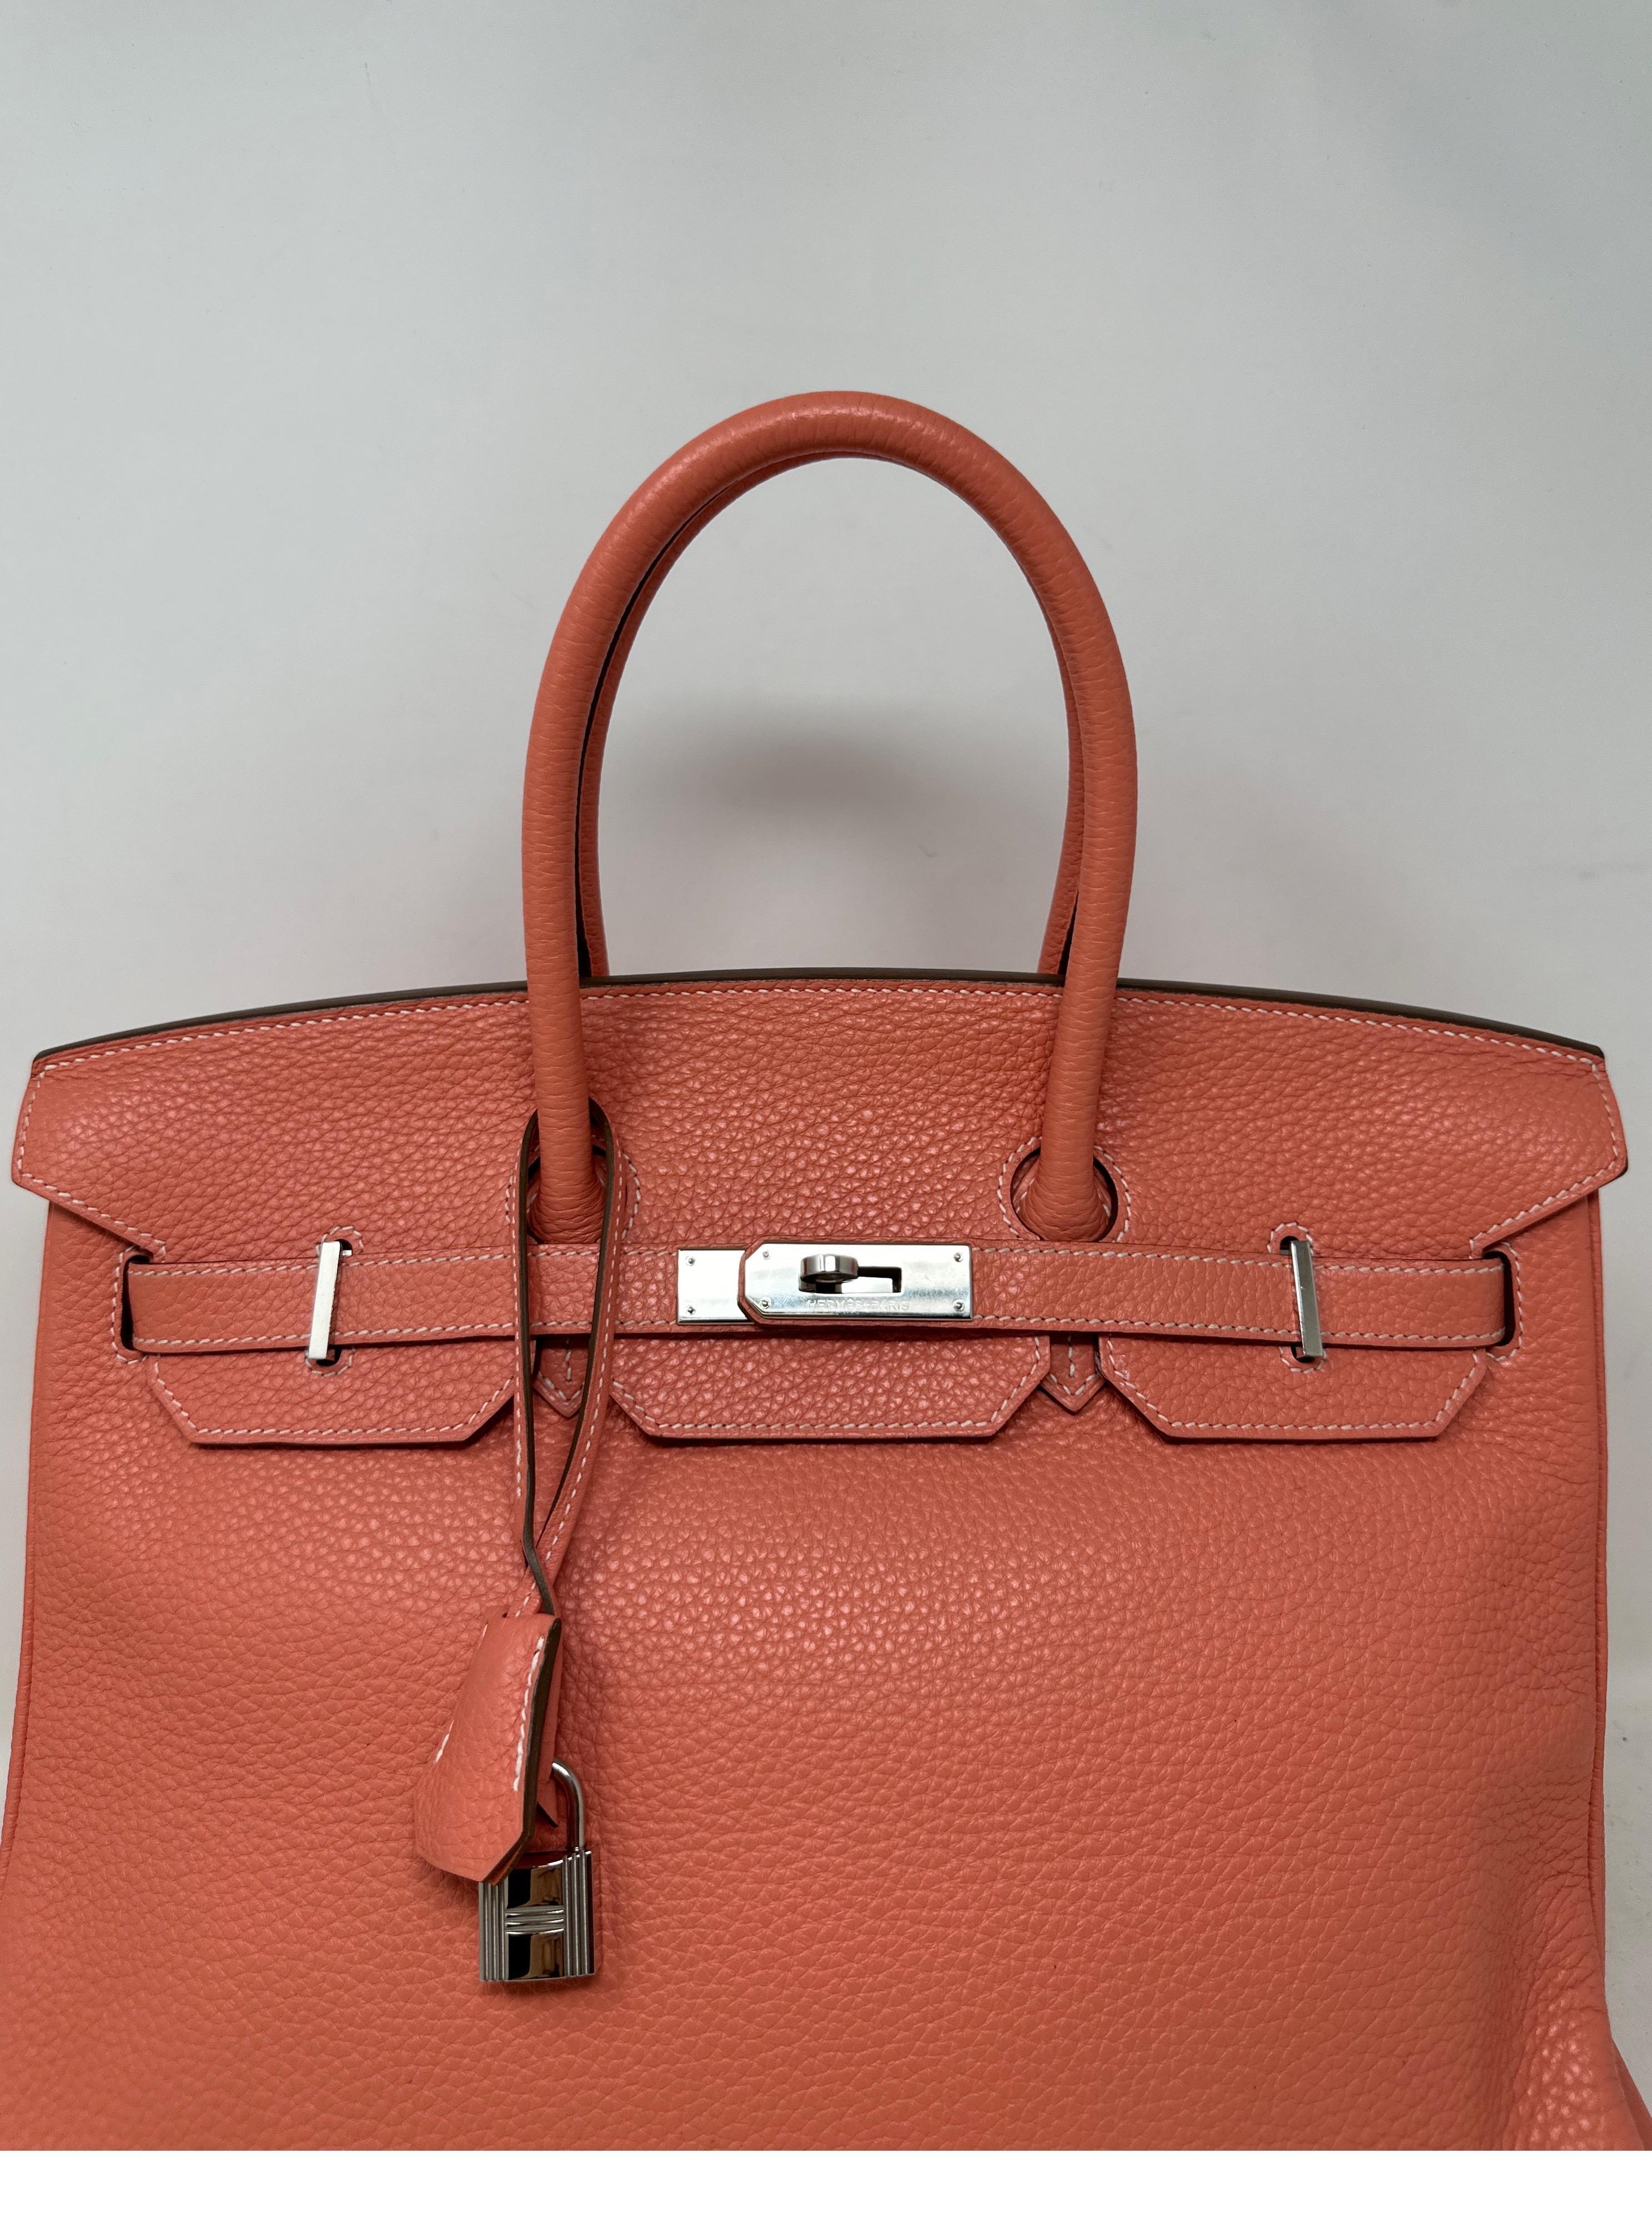 Hermes Pink Crevette Birkin 35 Bag. Pretty in pink light salmon color. Palladium silver hardware. Clemence leather. Very good condition. Interior clean. Great Spring or Summer color bag. Don't miss out on this amazing deal for a Birkin. Includes